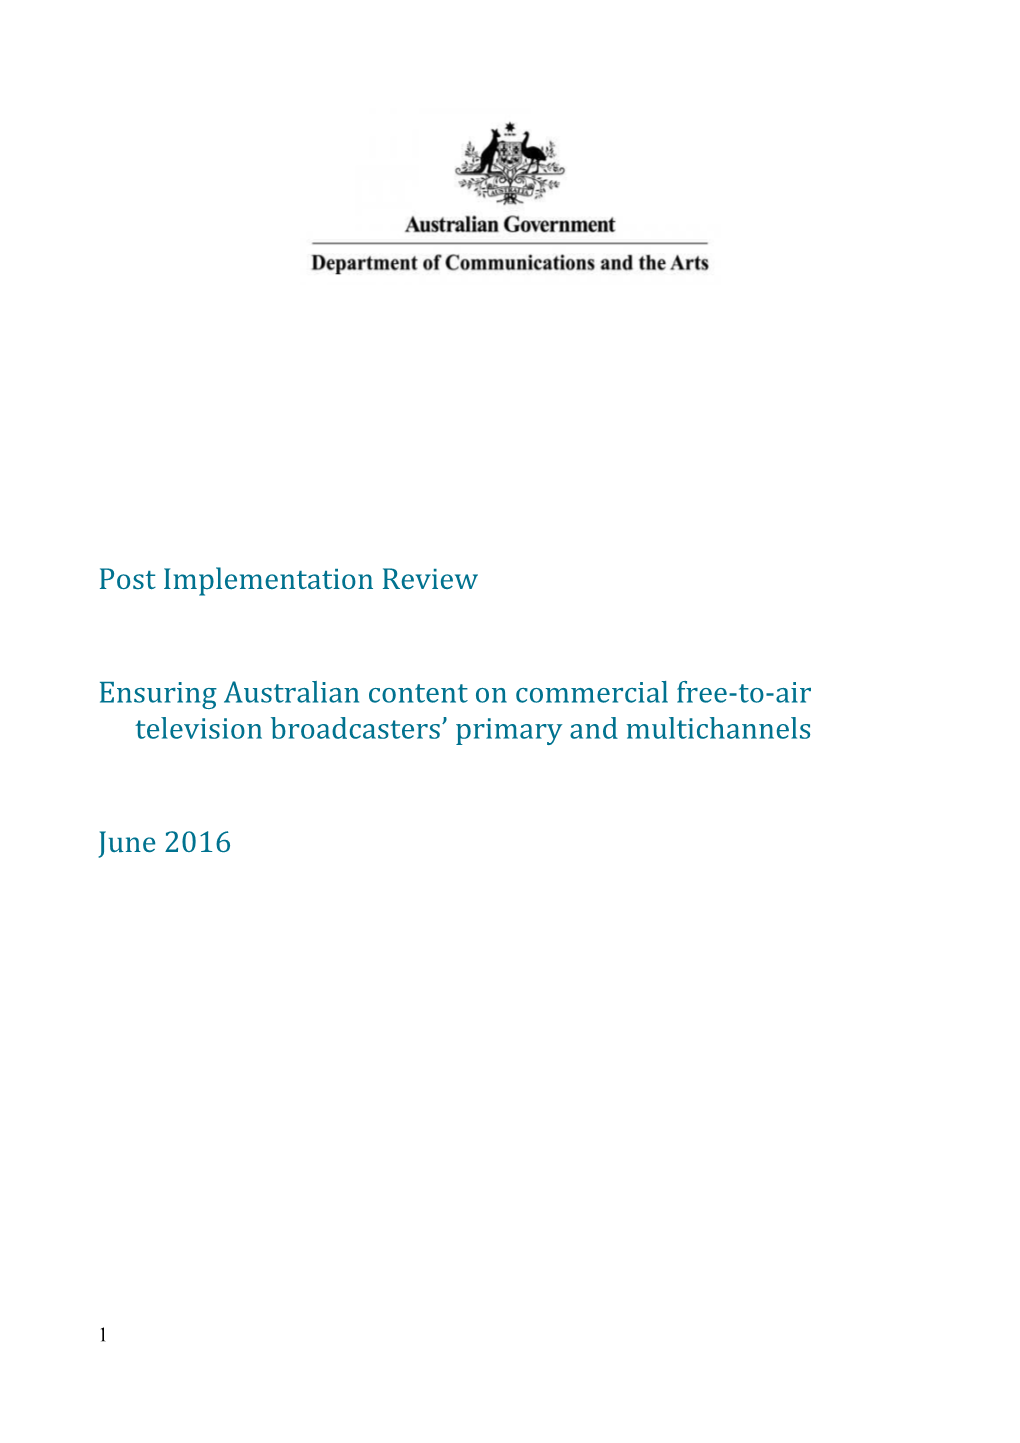 Ensuring Australian Content on Commercial Free-To-Air Television Broadcasters Primary And